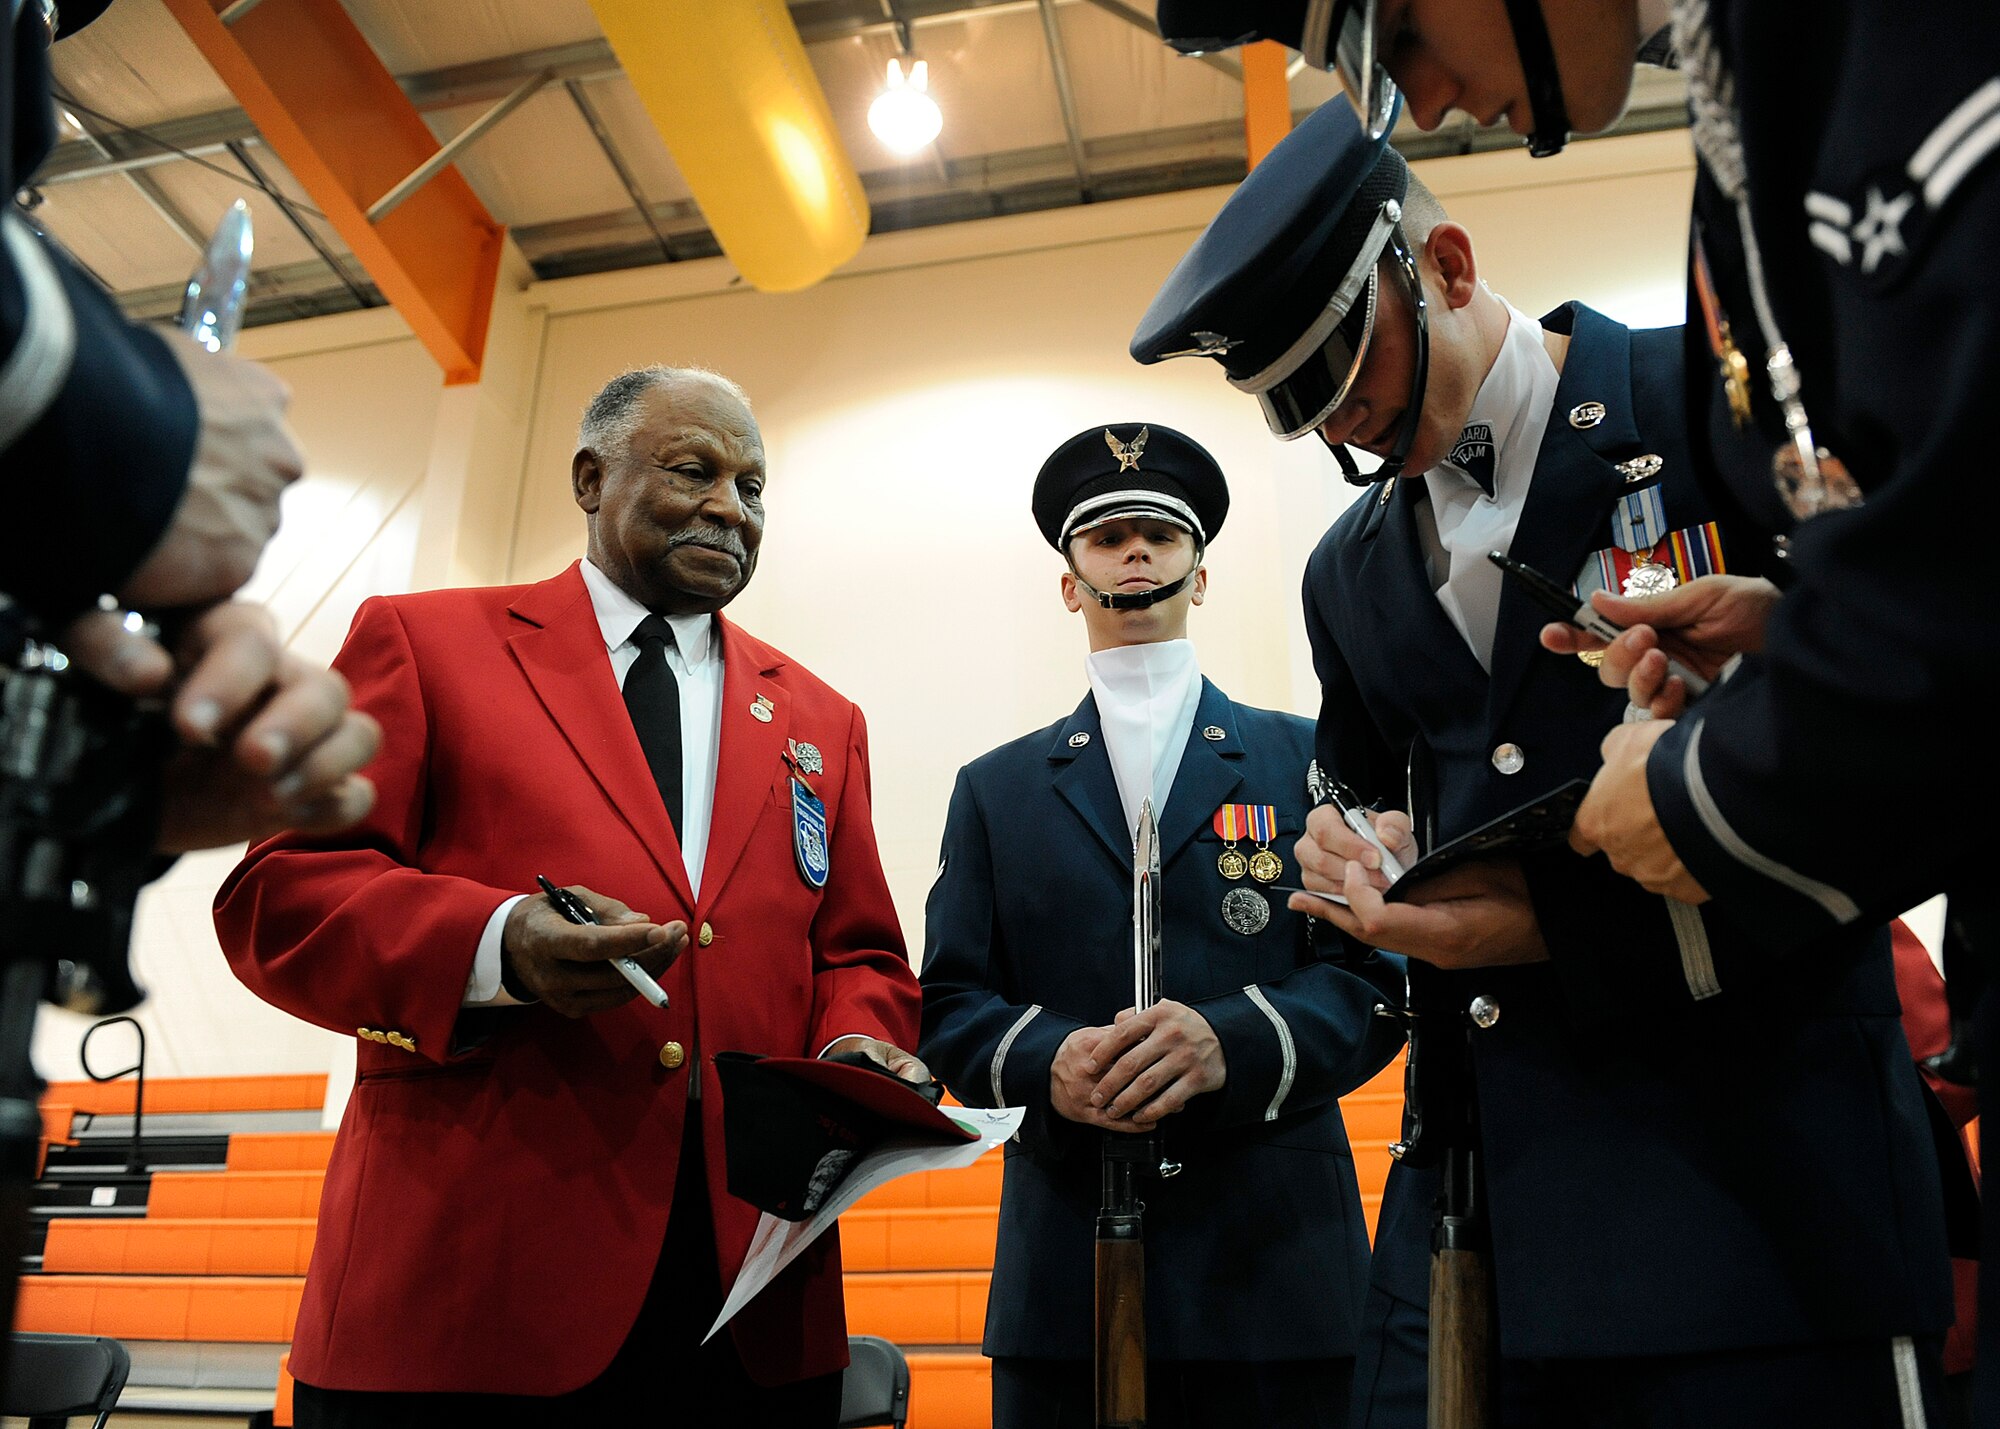 LANGLEY AIR FORCE BASE, Va. --  Air Force Honor Guard Drill Team members sign autographs for retired Chief Master Sgt. Grant Williams Sr., Tuskegee Airman, during Hampton Roads Air Force Week's Honoring America's Veterans ceremony April 20.  Air Force Week is the Air Force's chance to thank those who support the military through a variety of free events.  (U.S. Air Force photo/Senior Airman Vernon Young)